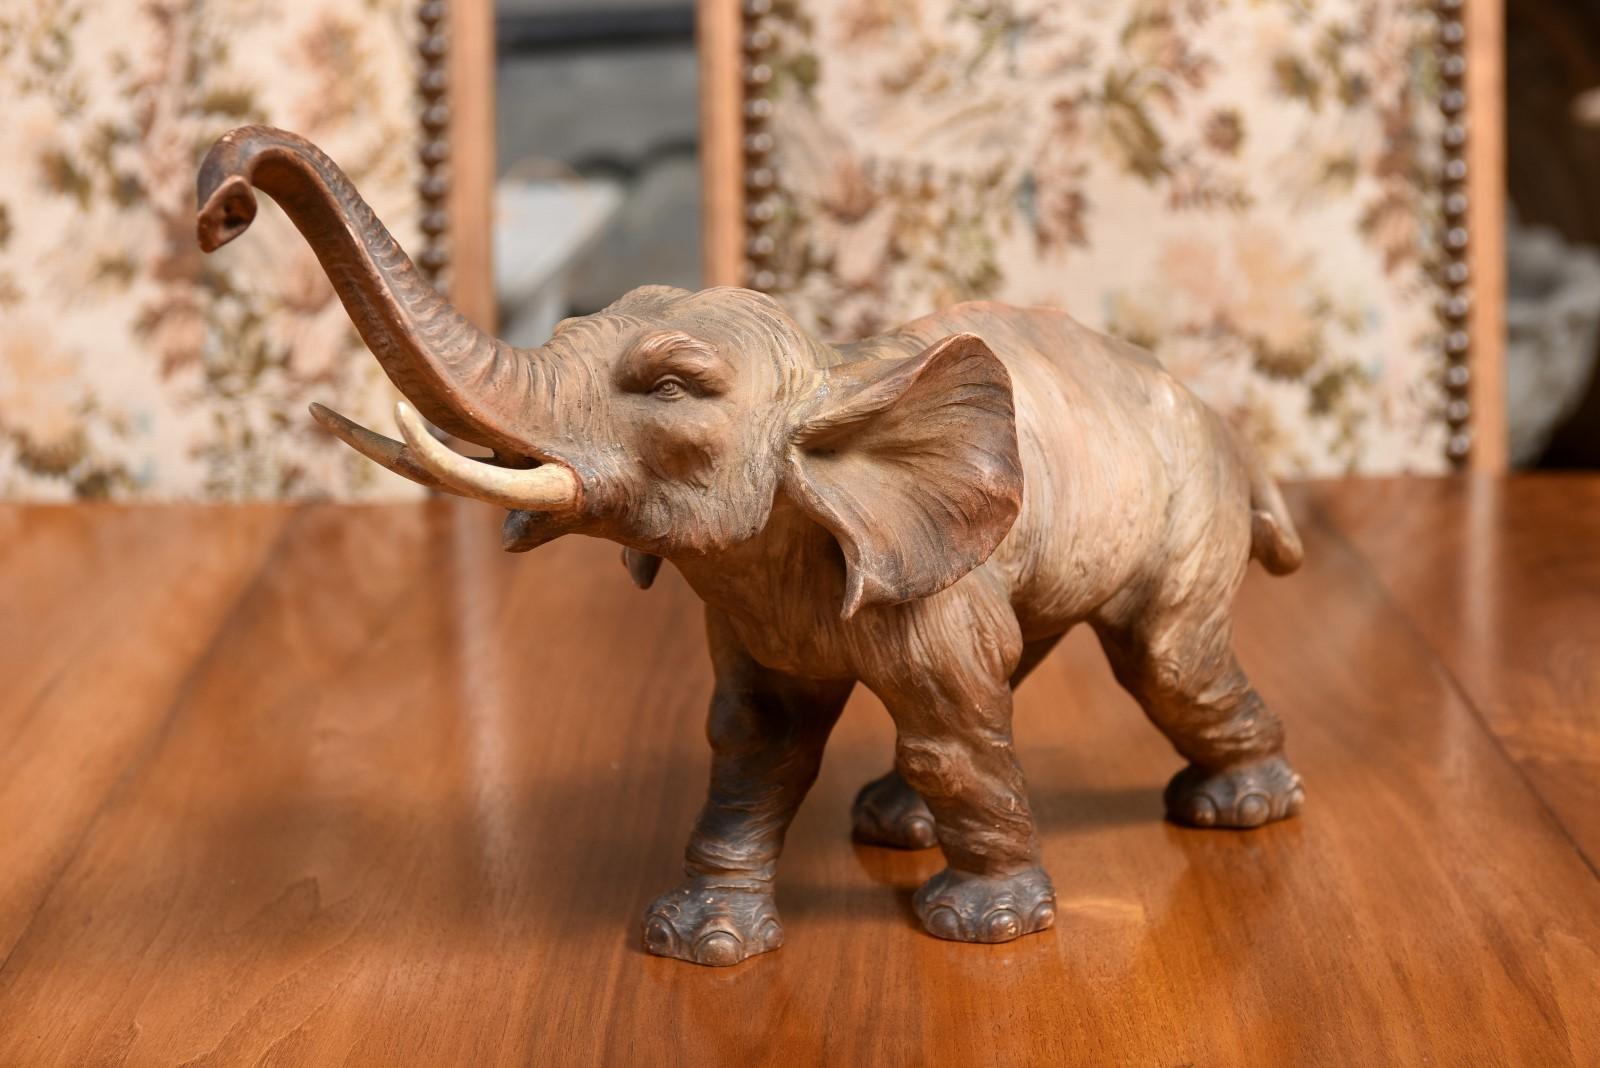 French 19th Century Terracotta Sculpture Depicting a Walking Asian Elephant 6